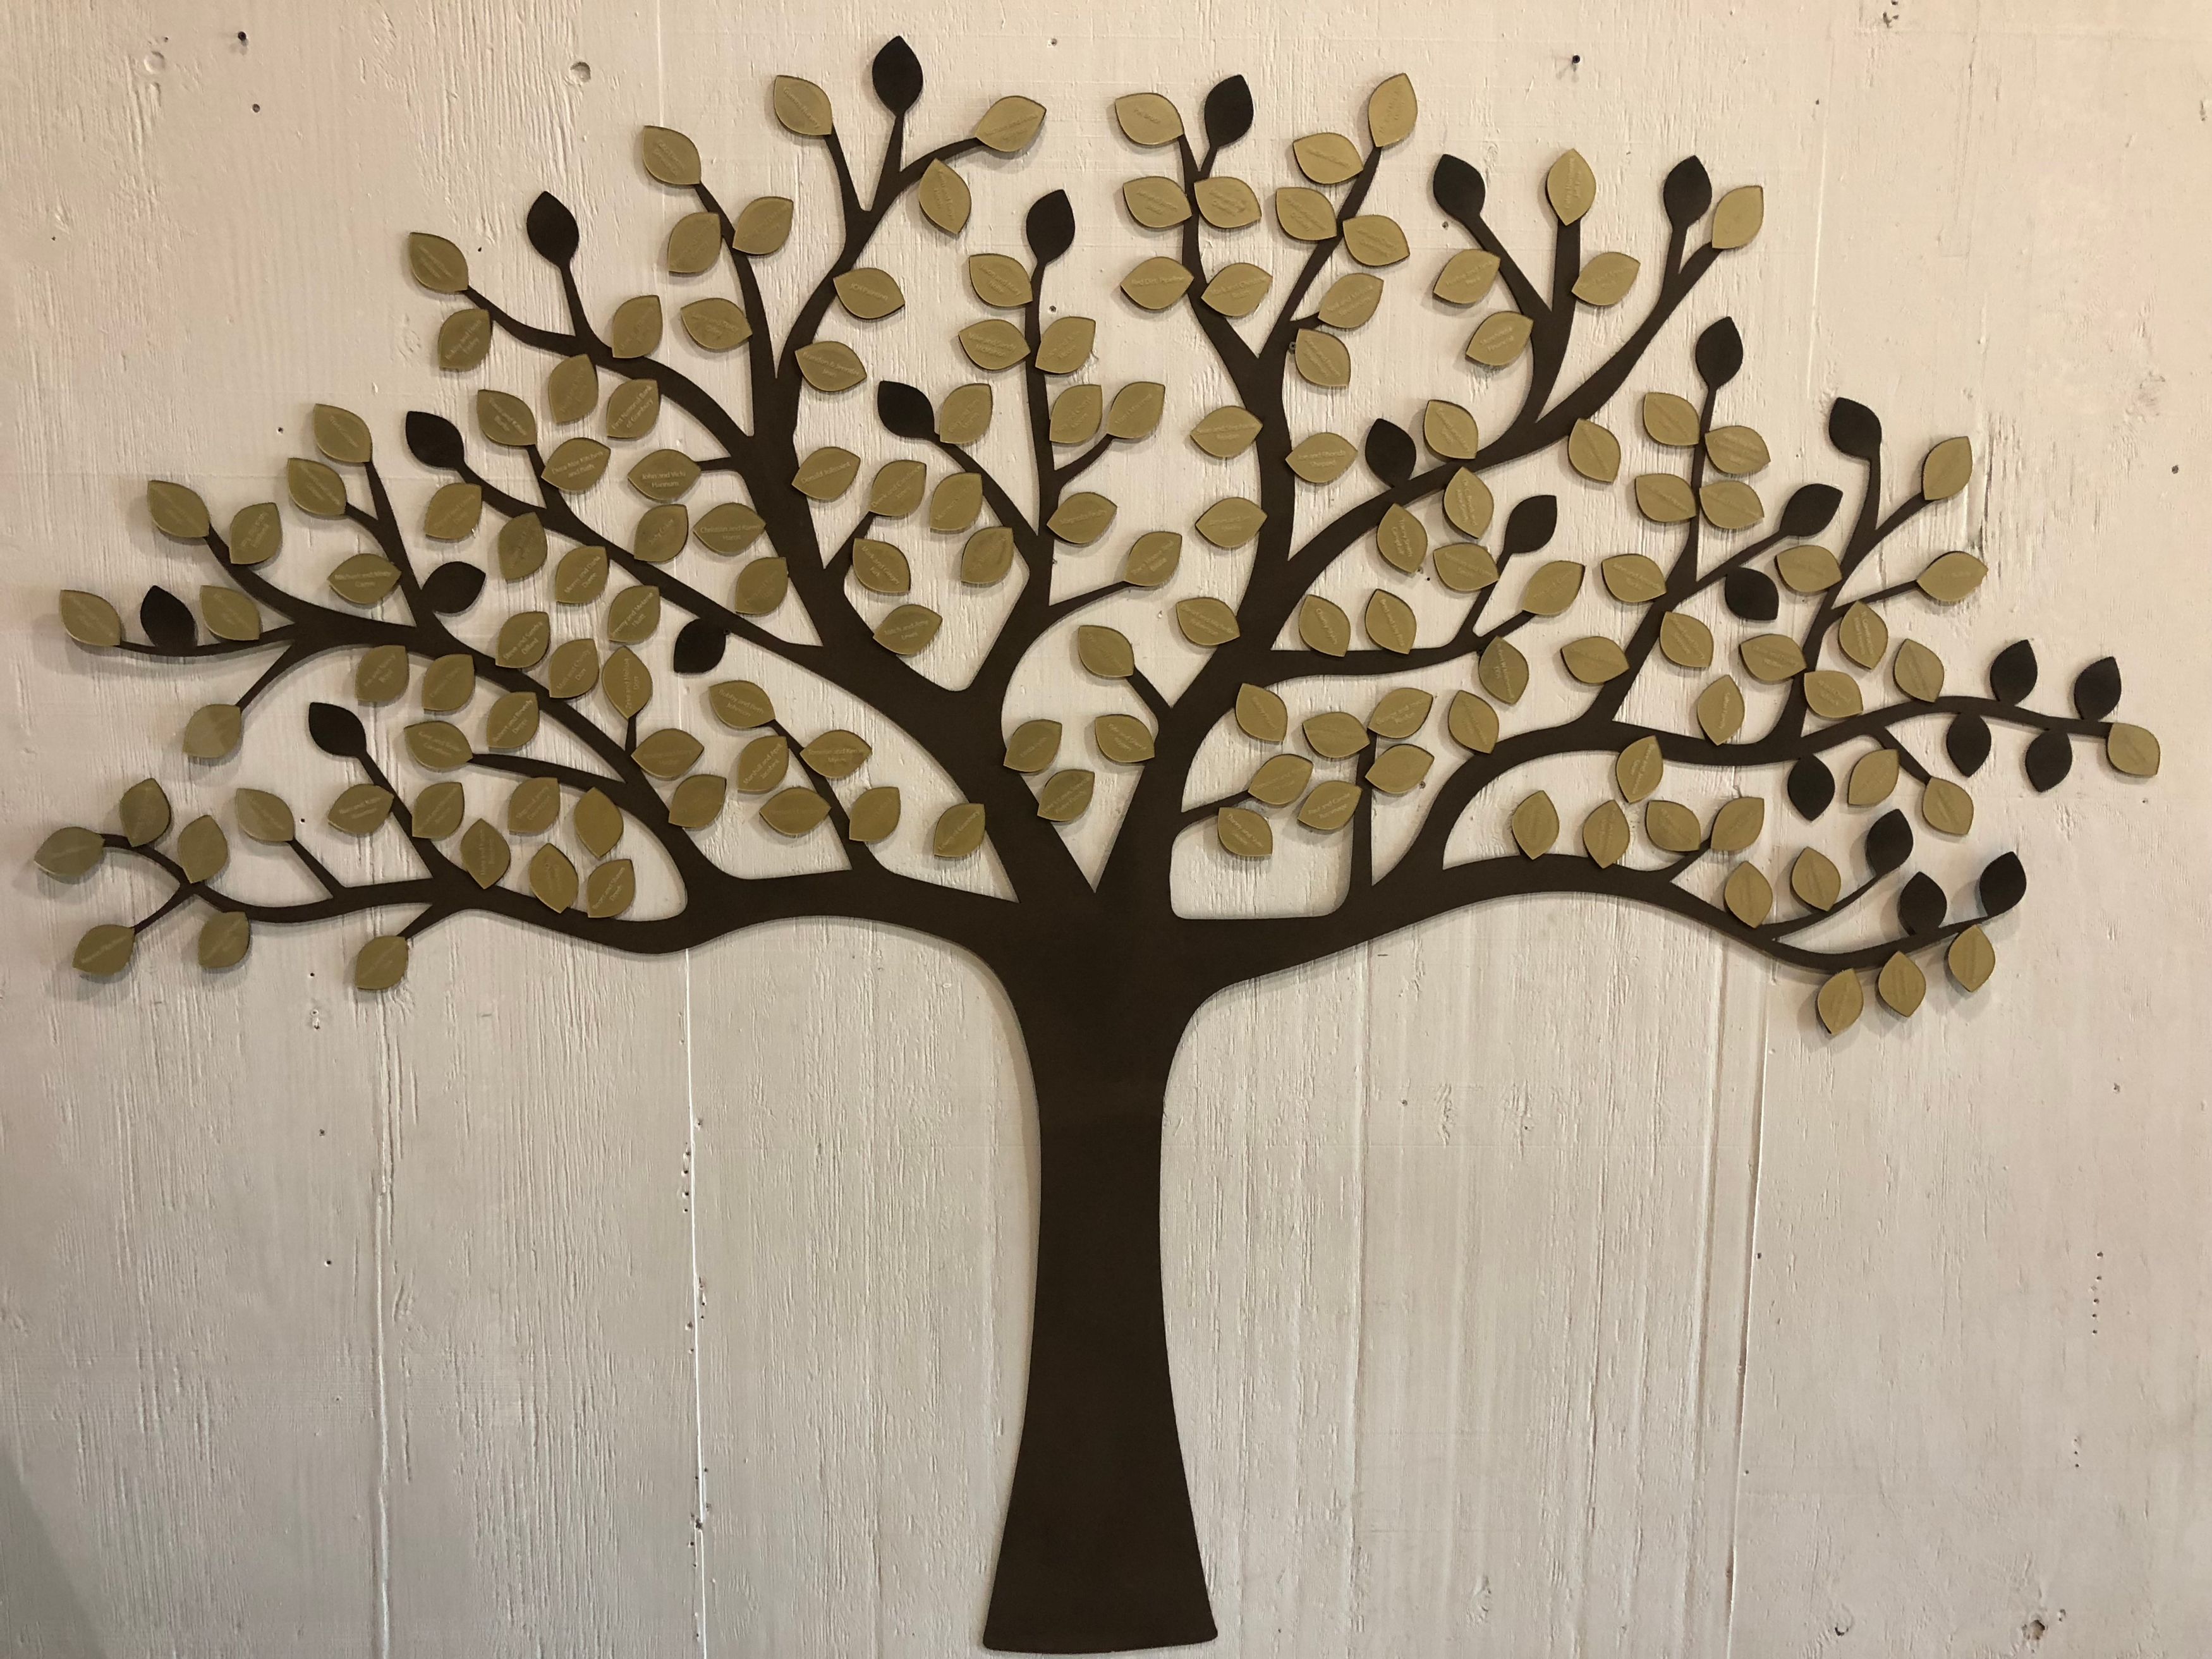 A giving tree